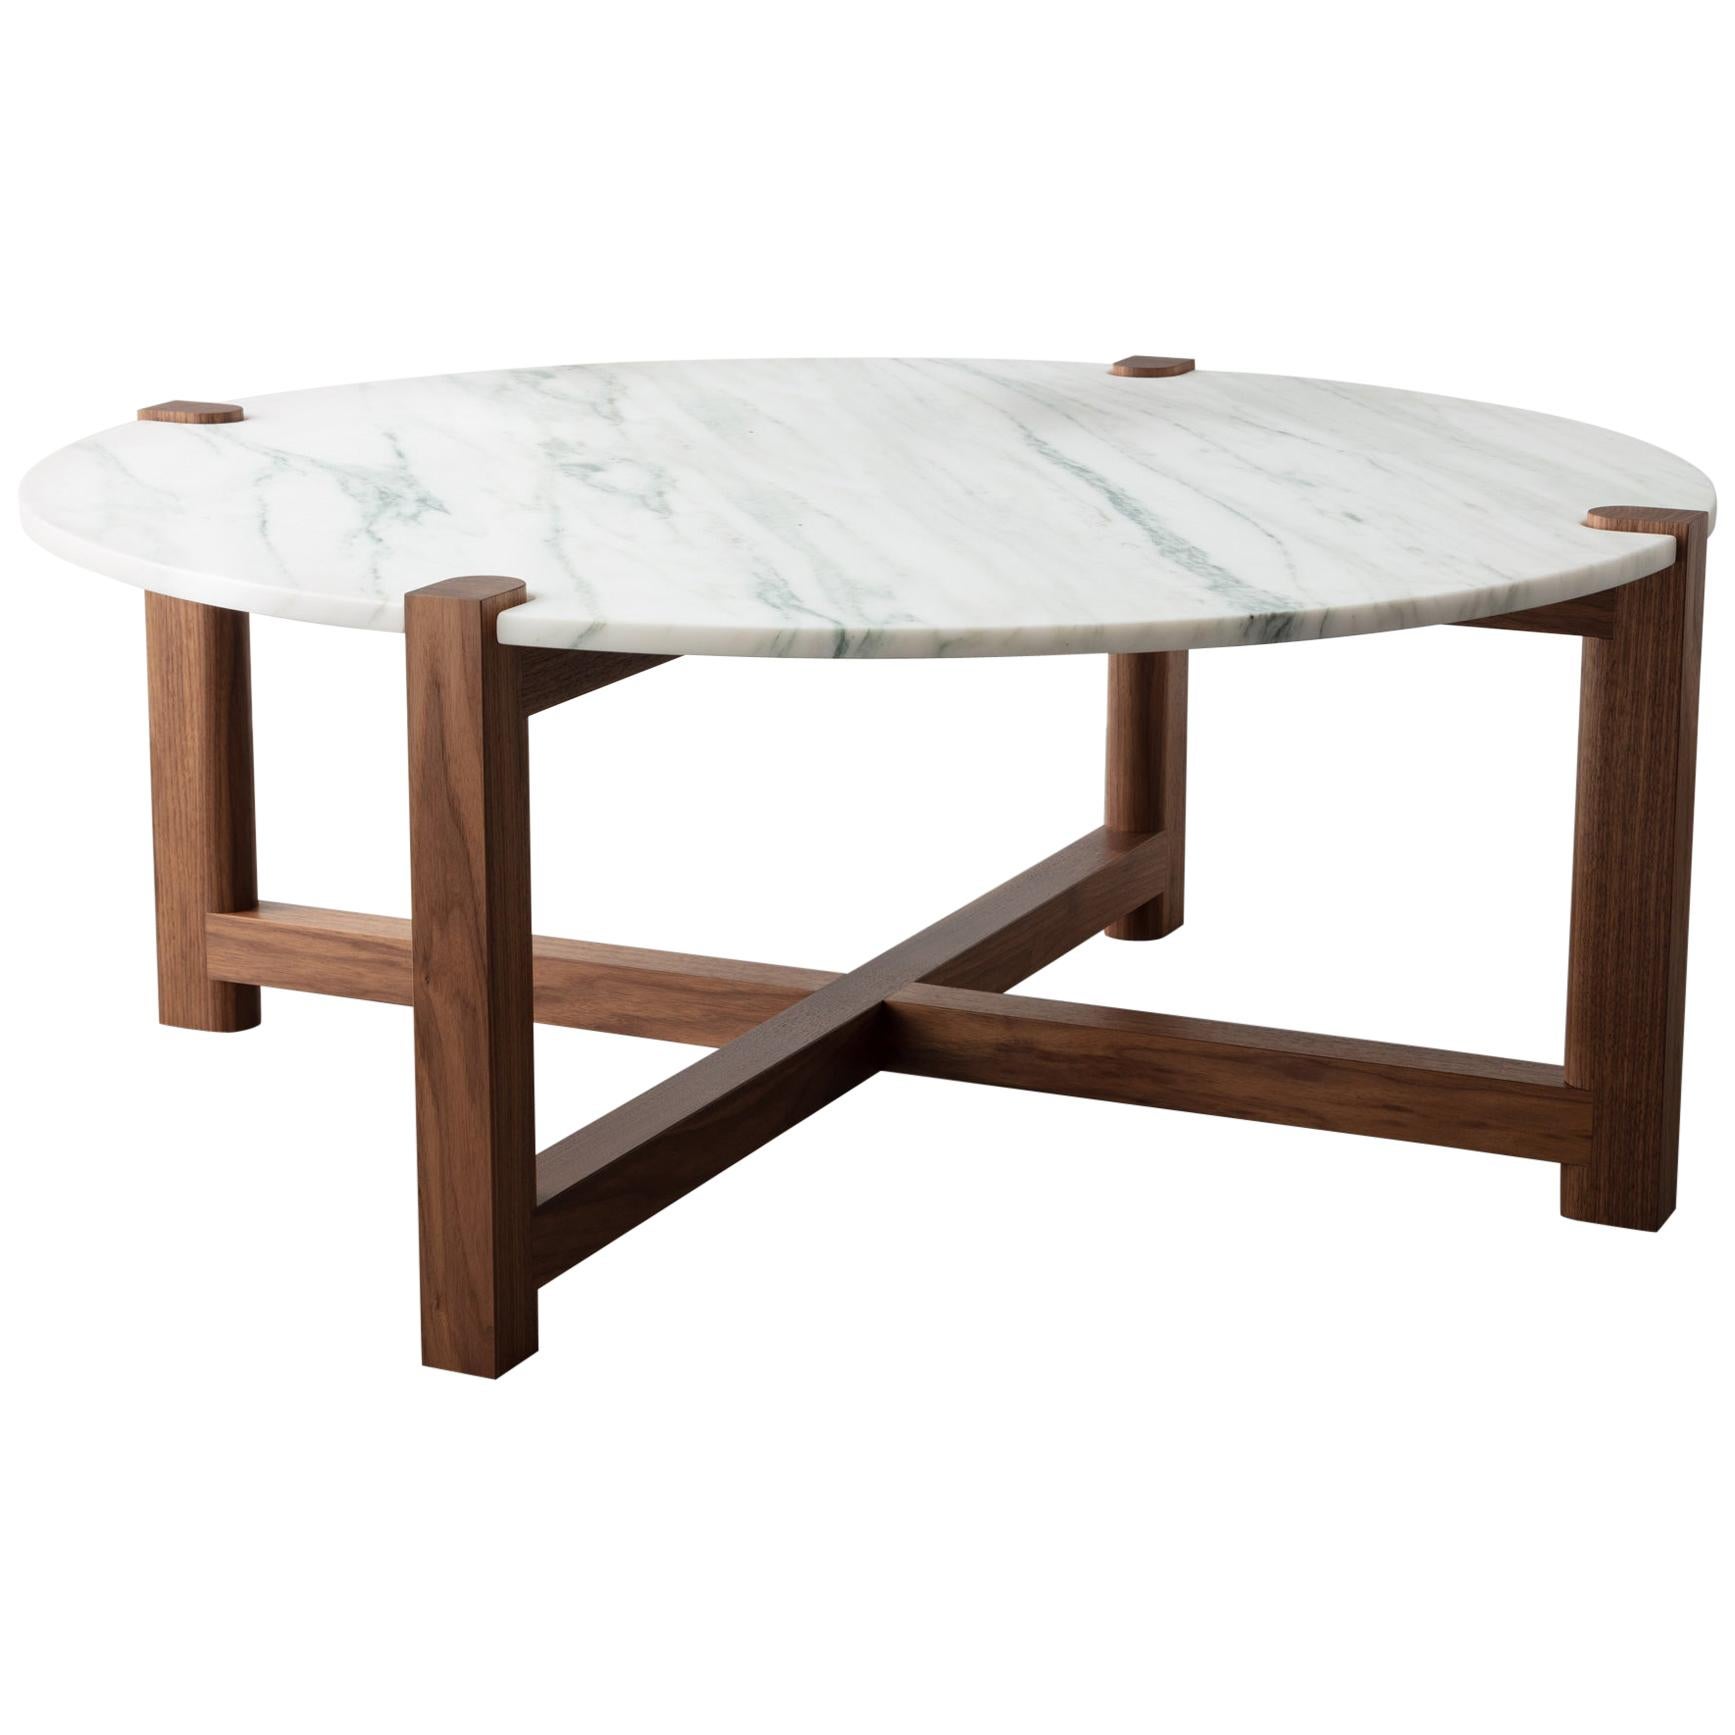 Pierce Coffee Table, 36"D Walnut, Carrara Marble or COS, Made to Measure, 